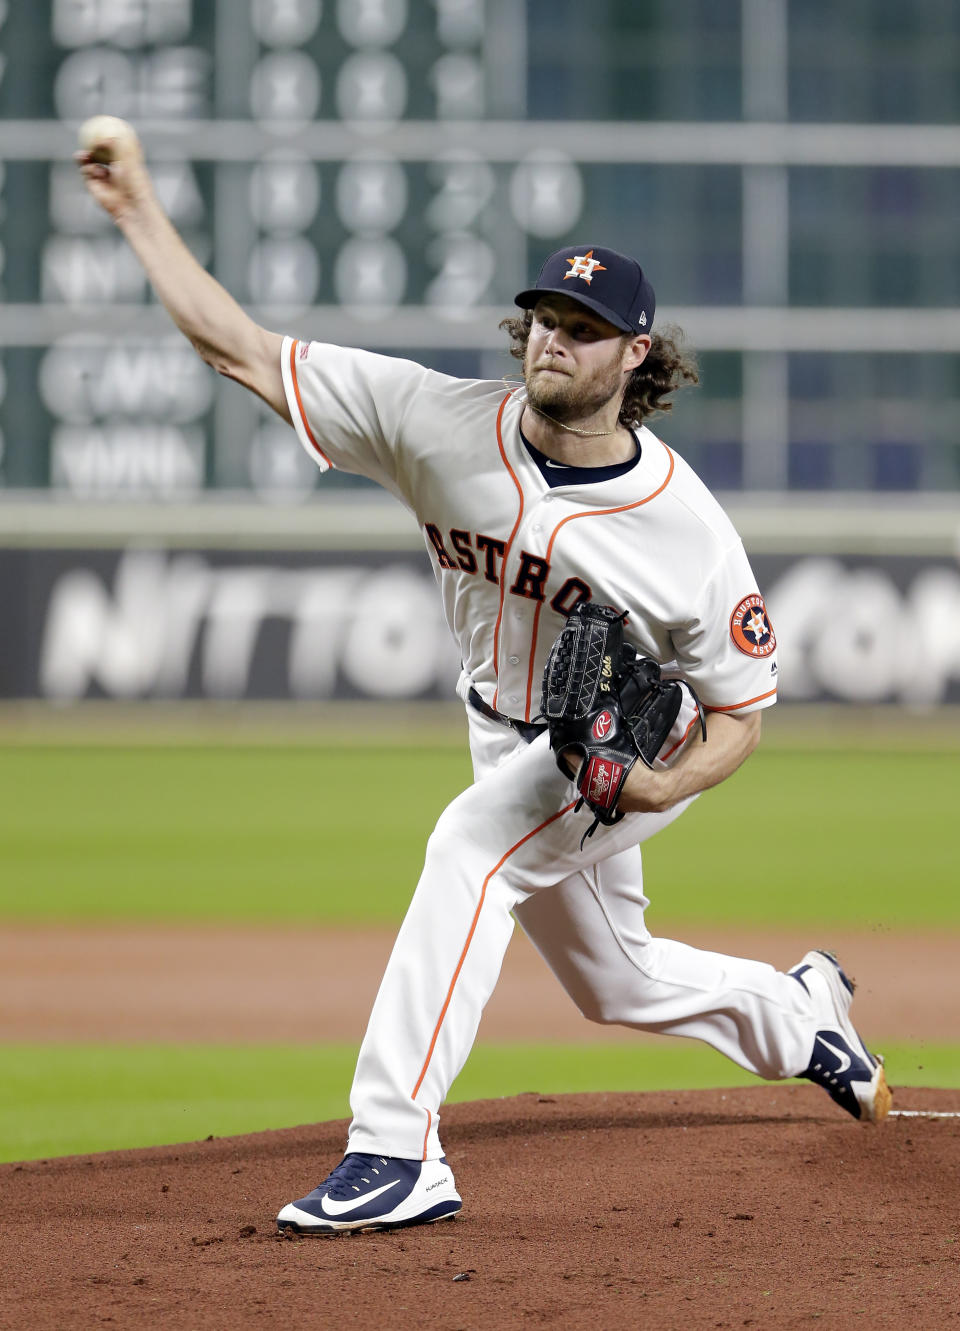 Houston Astros starting pitcher Gerrit Cole throws against the Texas Rangers during the first inning of a baseball game Wednesday, Sept. 18, 2019, in Houston. (AP Photo/Michael Wyke)